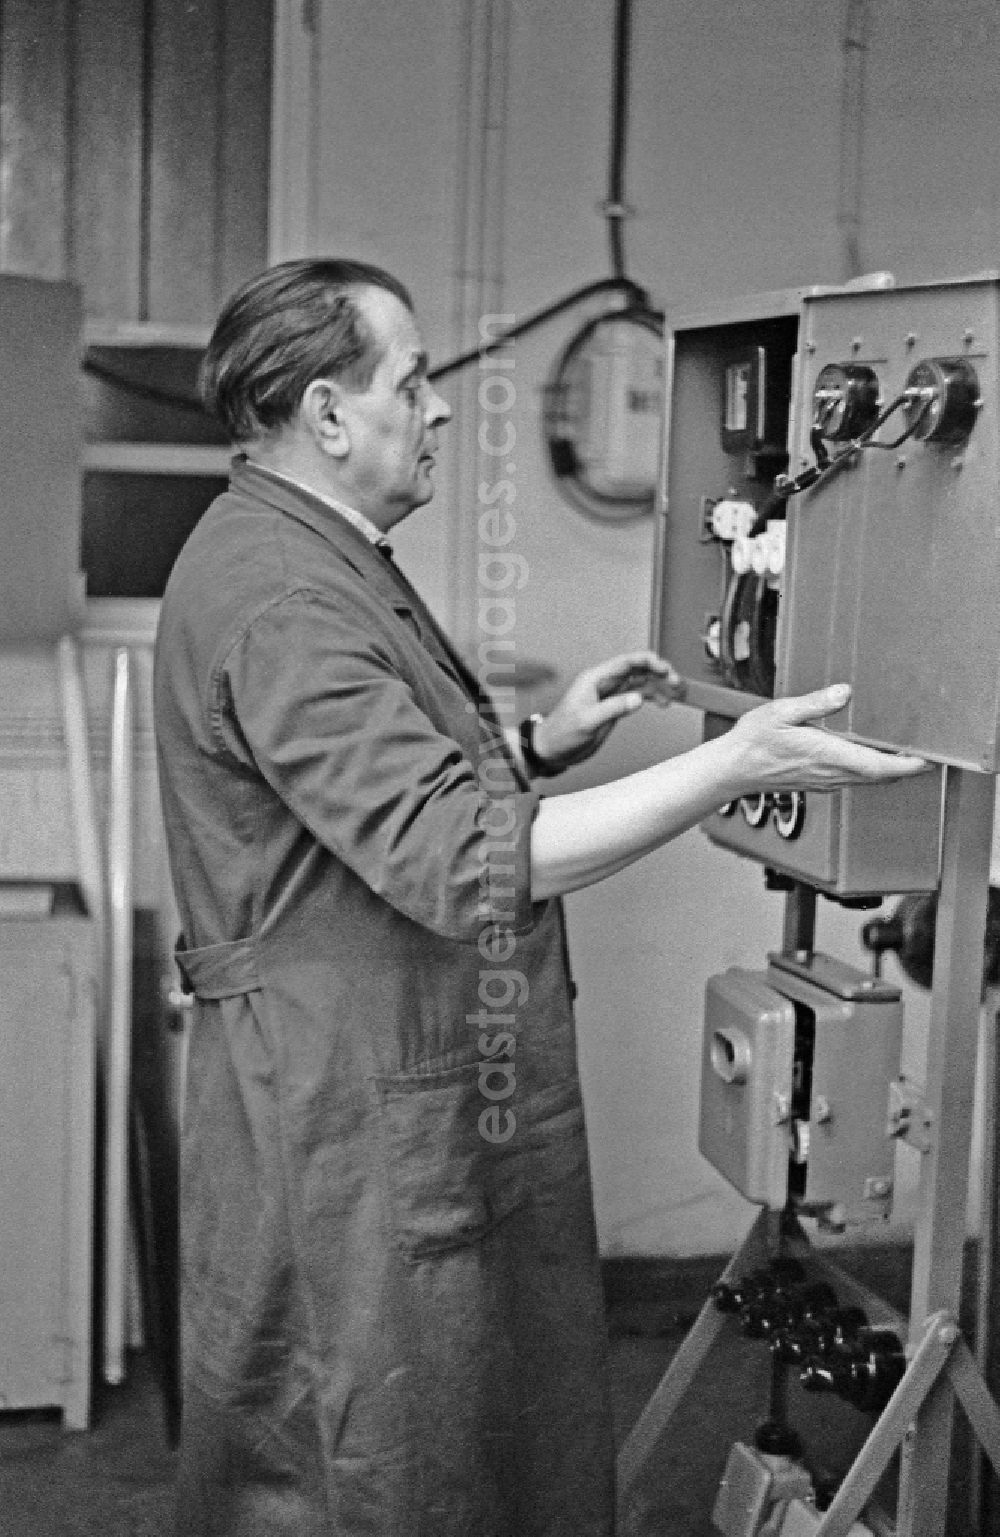 GDR image archive: Berlin - Practical training in an electromechanic - apprenticeship training class in the teaching cabinet of the vocational school of the VEB Elektro-Apparate-Werke in the district of Treptow in Berlin East Berlin on the territory of the former GDR, German Democratic Republic